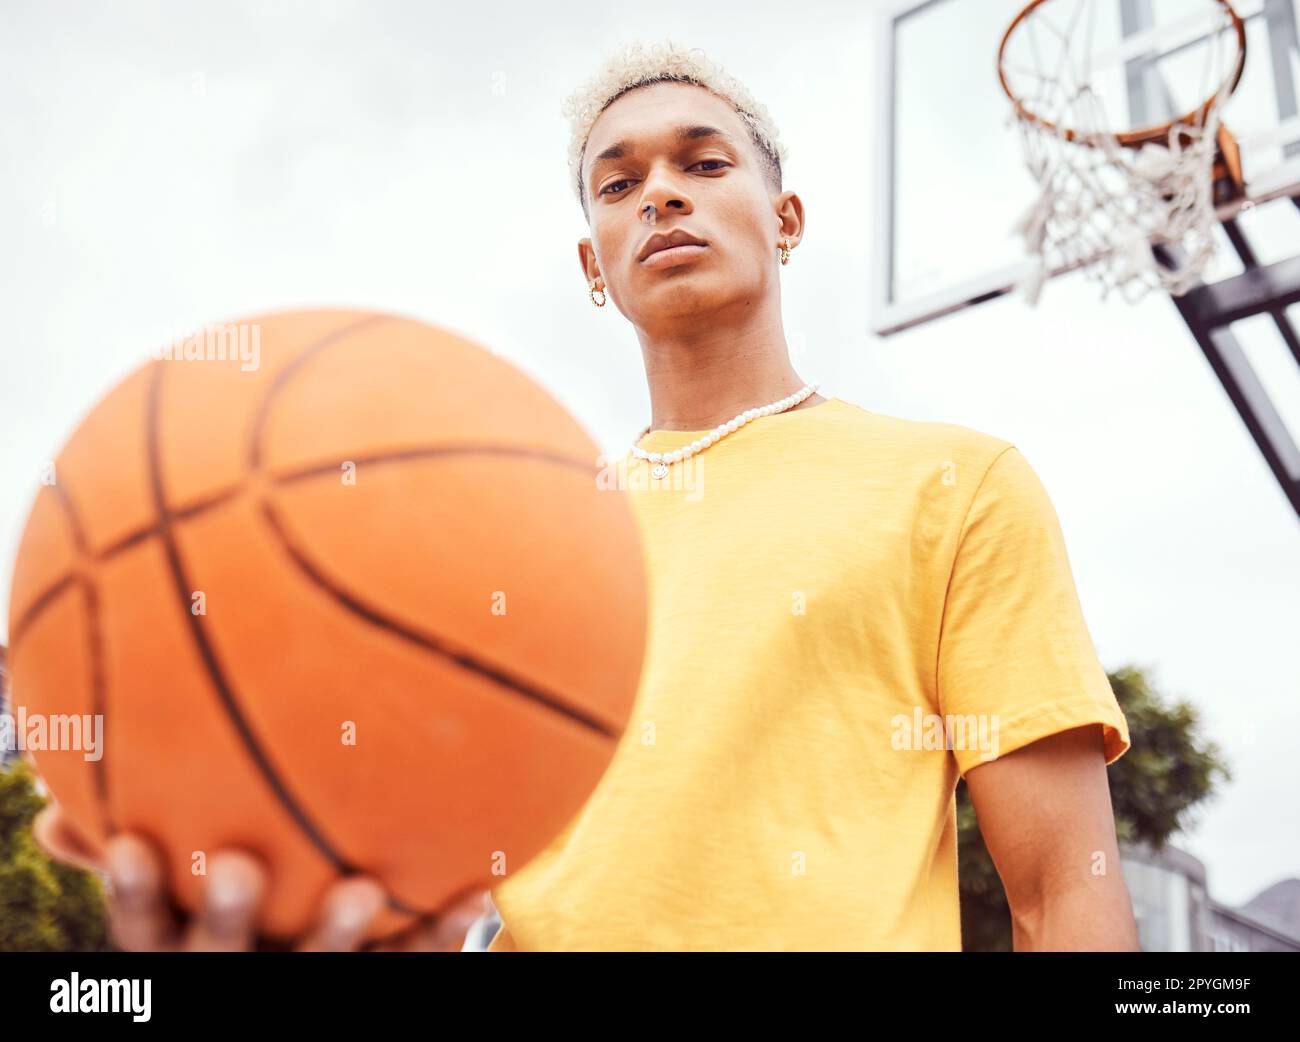 Sports, basketball court and a portrait of man with ball outside at park. Exercise, motivation and workout for fitness, wellness and health. Street game, outdoor basketball training and serious face. Stock Photo